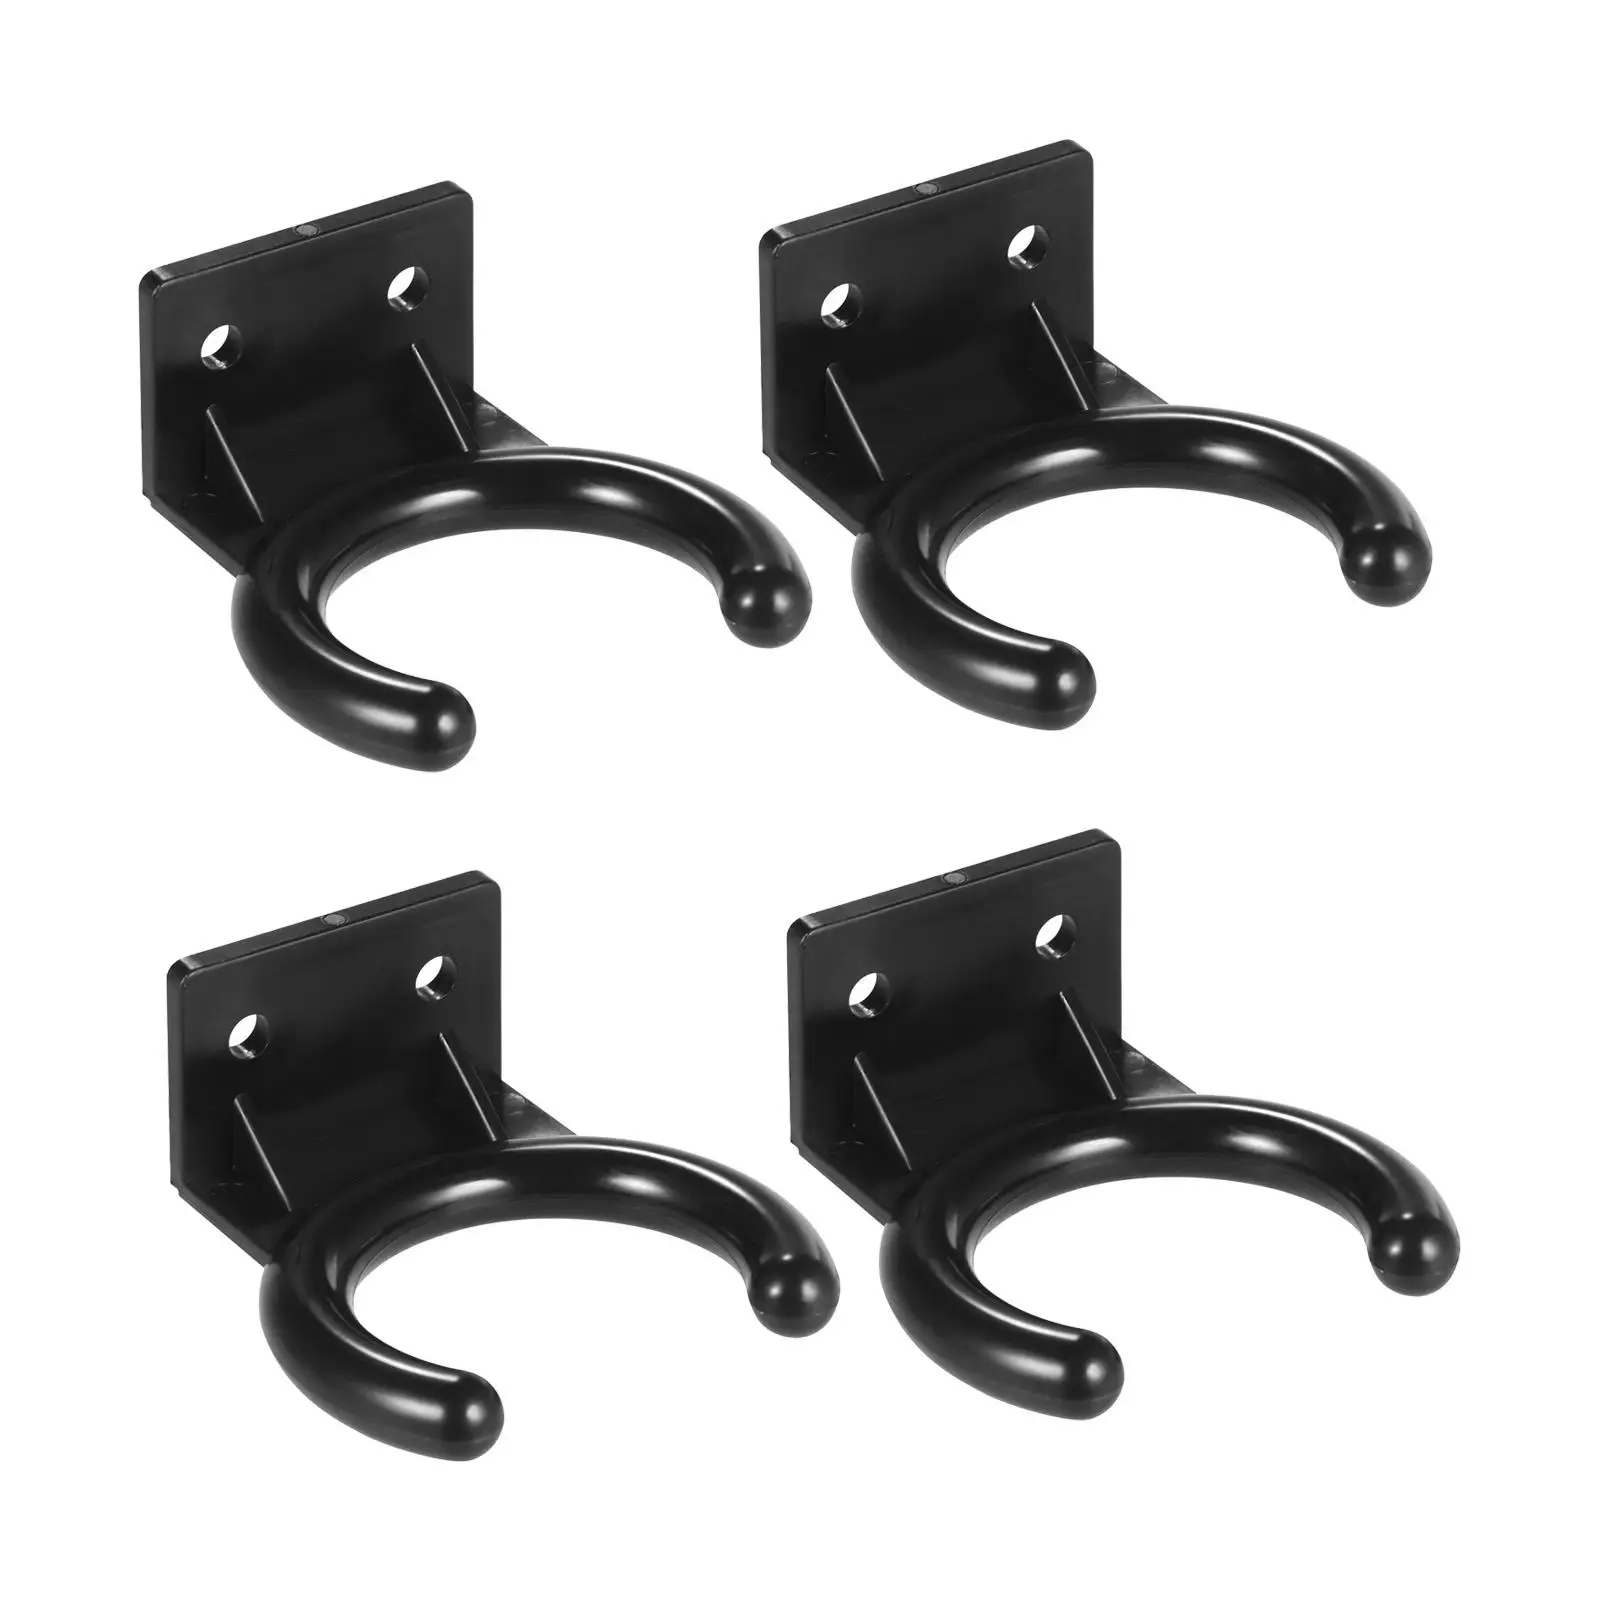 4Pcs Wall Mounted Microphone Hook Wall Hanger Clamp Mic Stands Clip Holder Rack Black Brackets for Home Office KTV